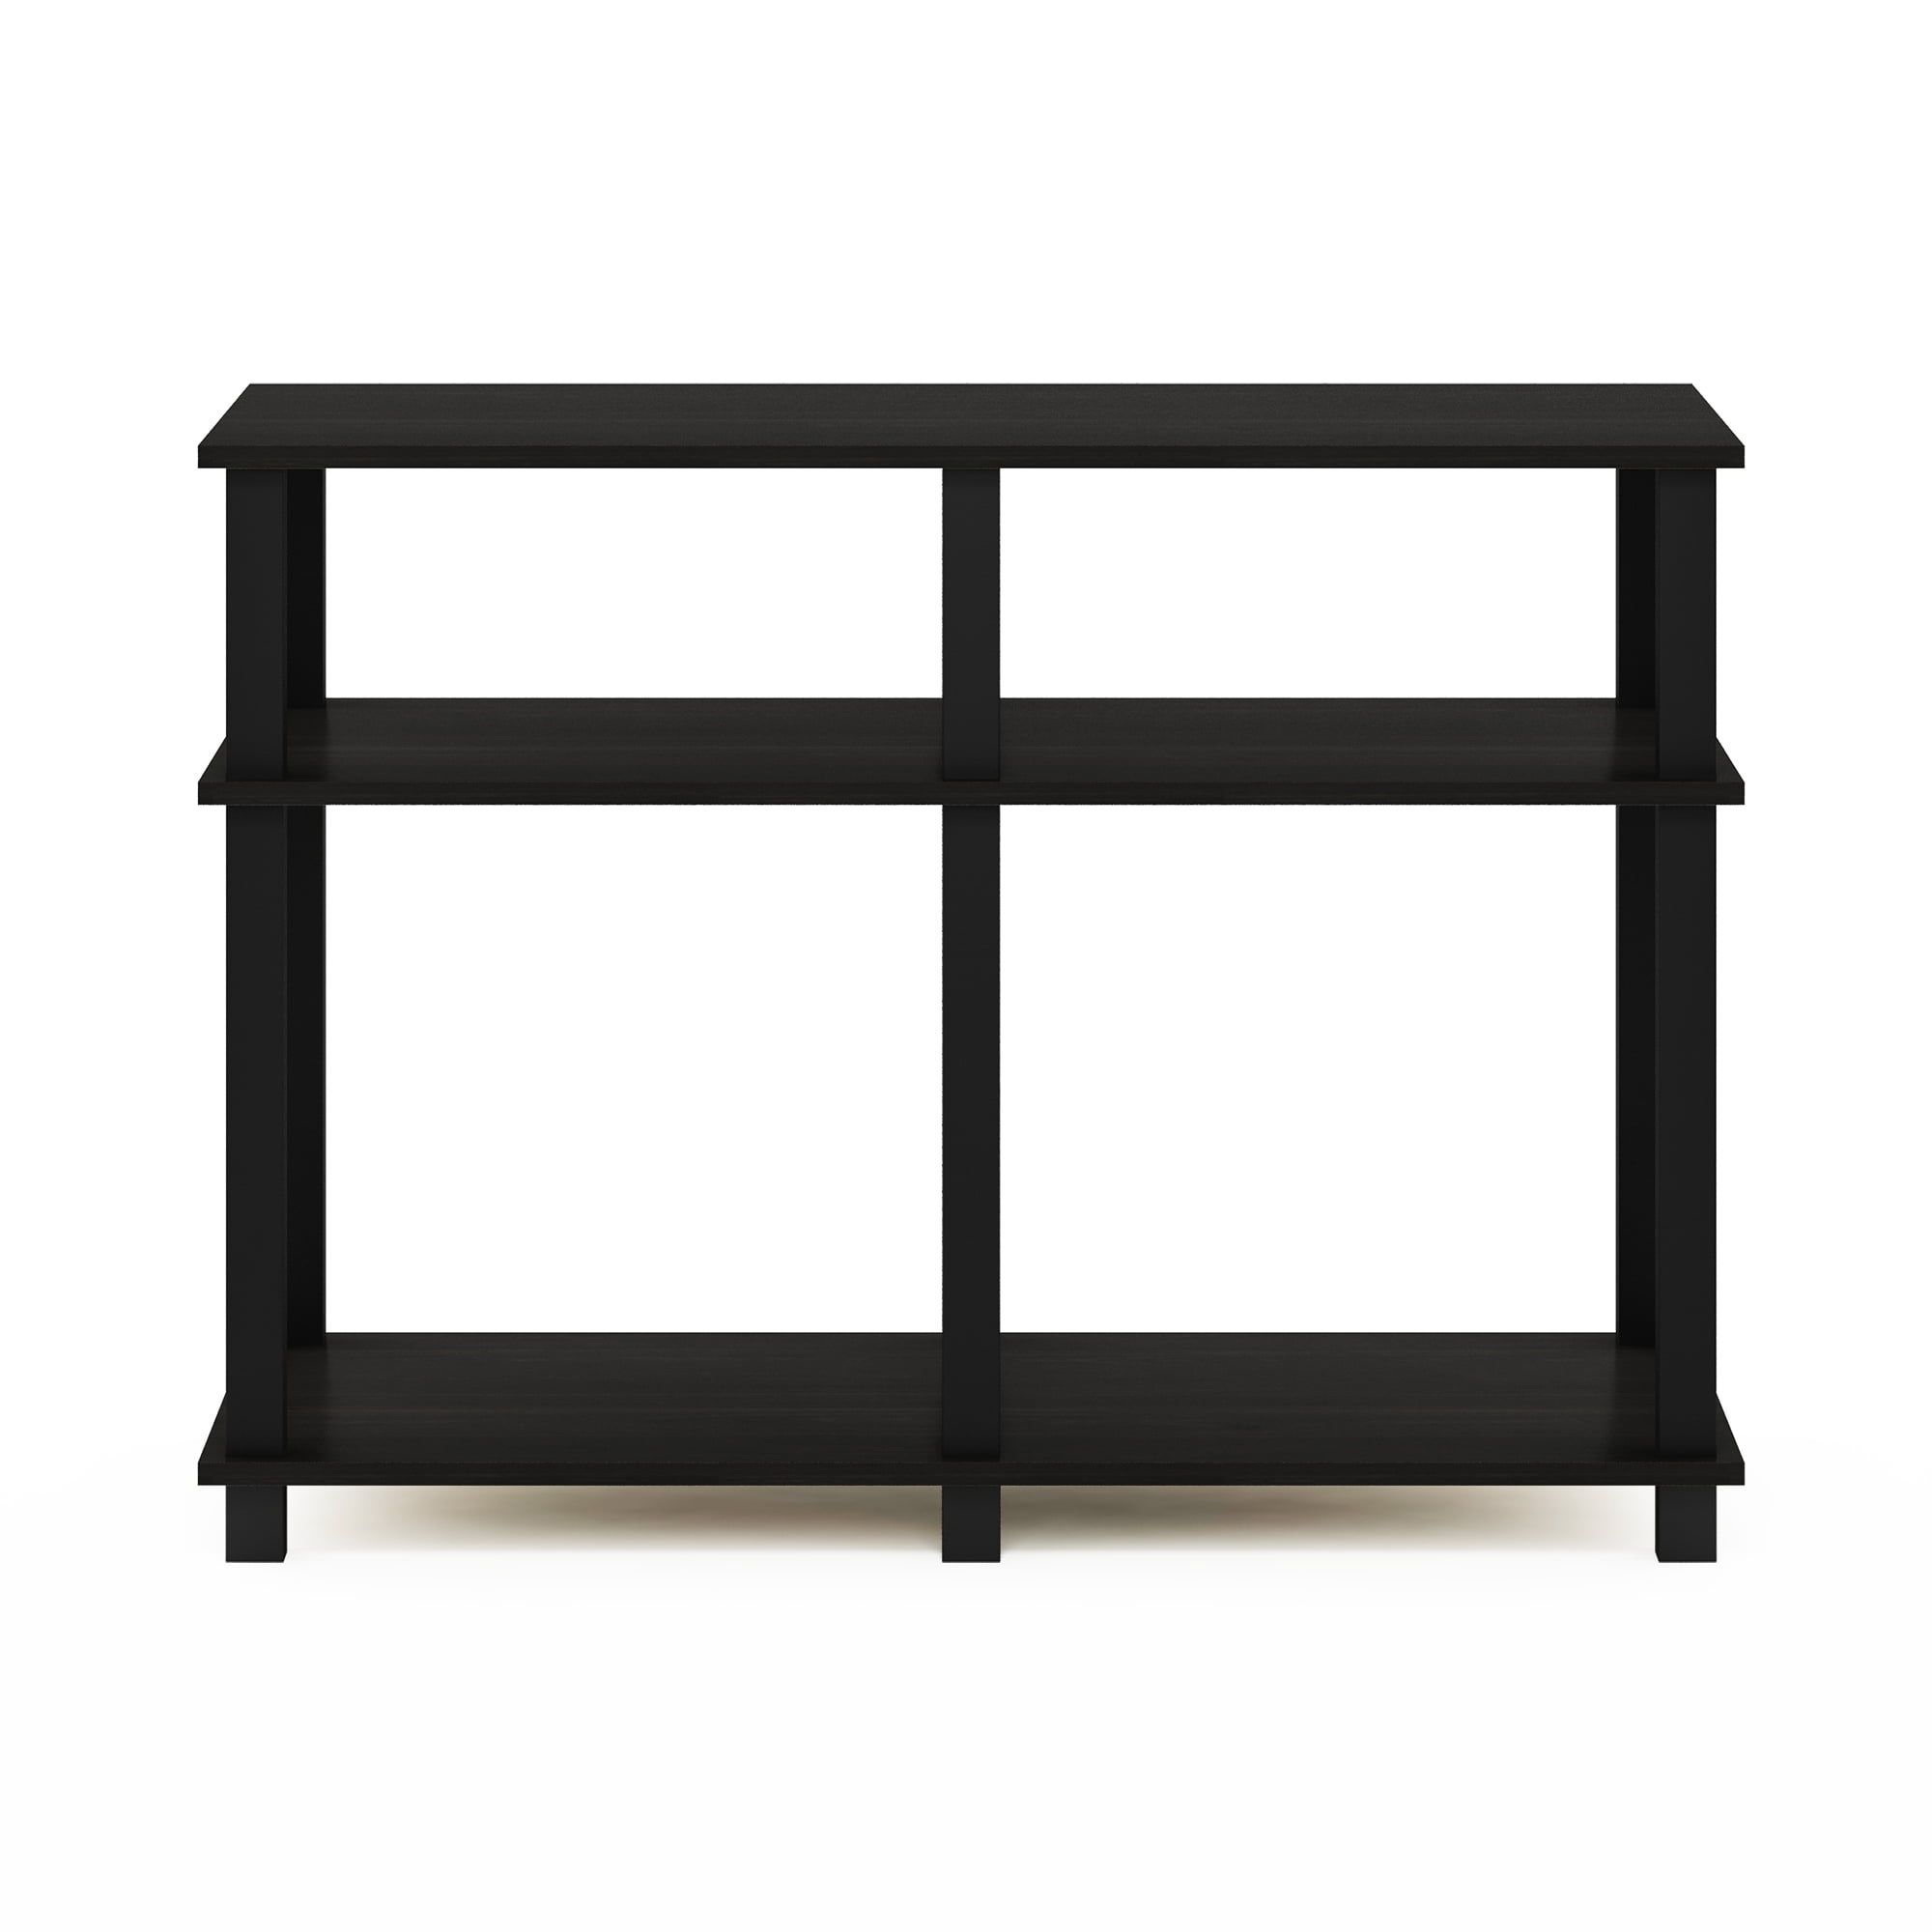 Furinno Romain Turn N Tube Tv Stand For Tv Up To 40 Inch, Espresso/black –  Walmart Regarding Romain Stands For Tvs (View 3 of 15)